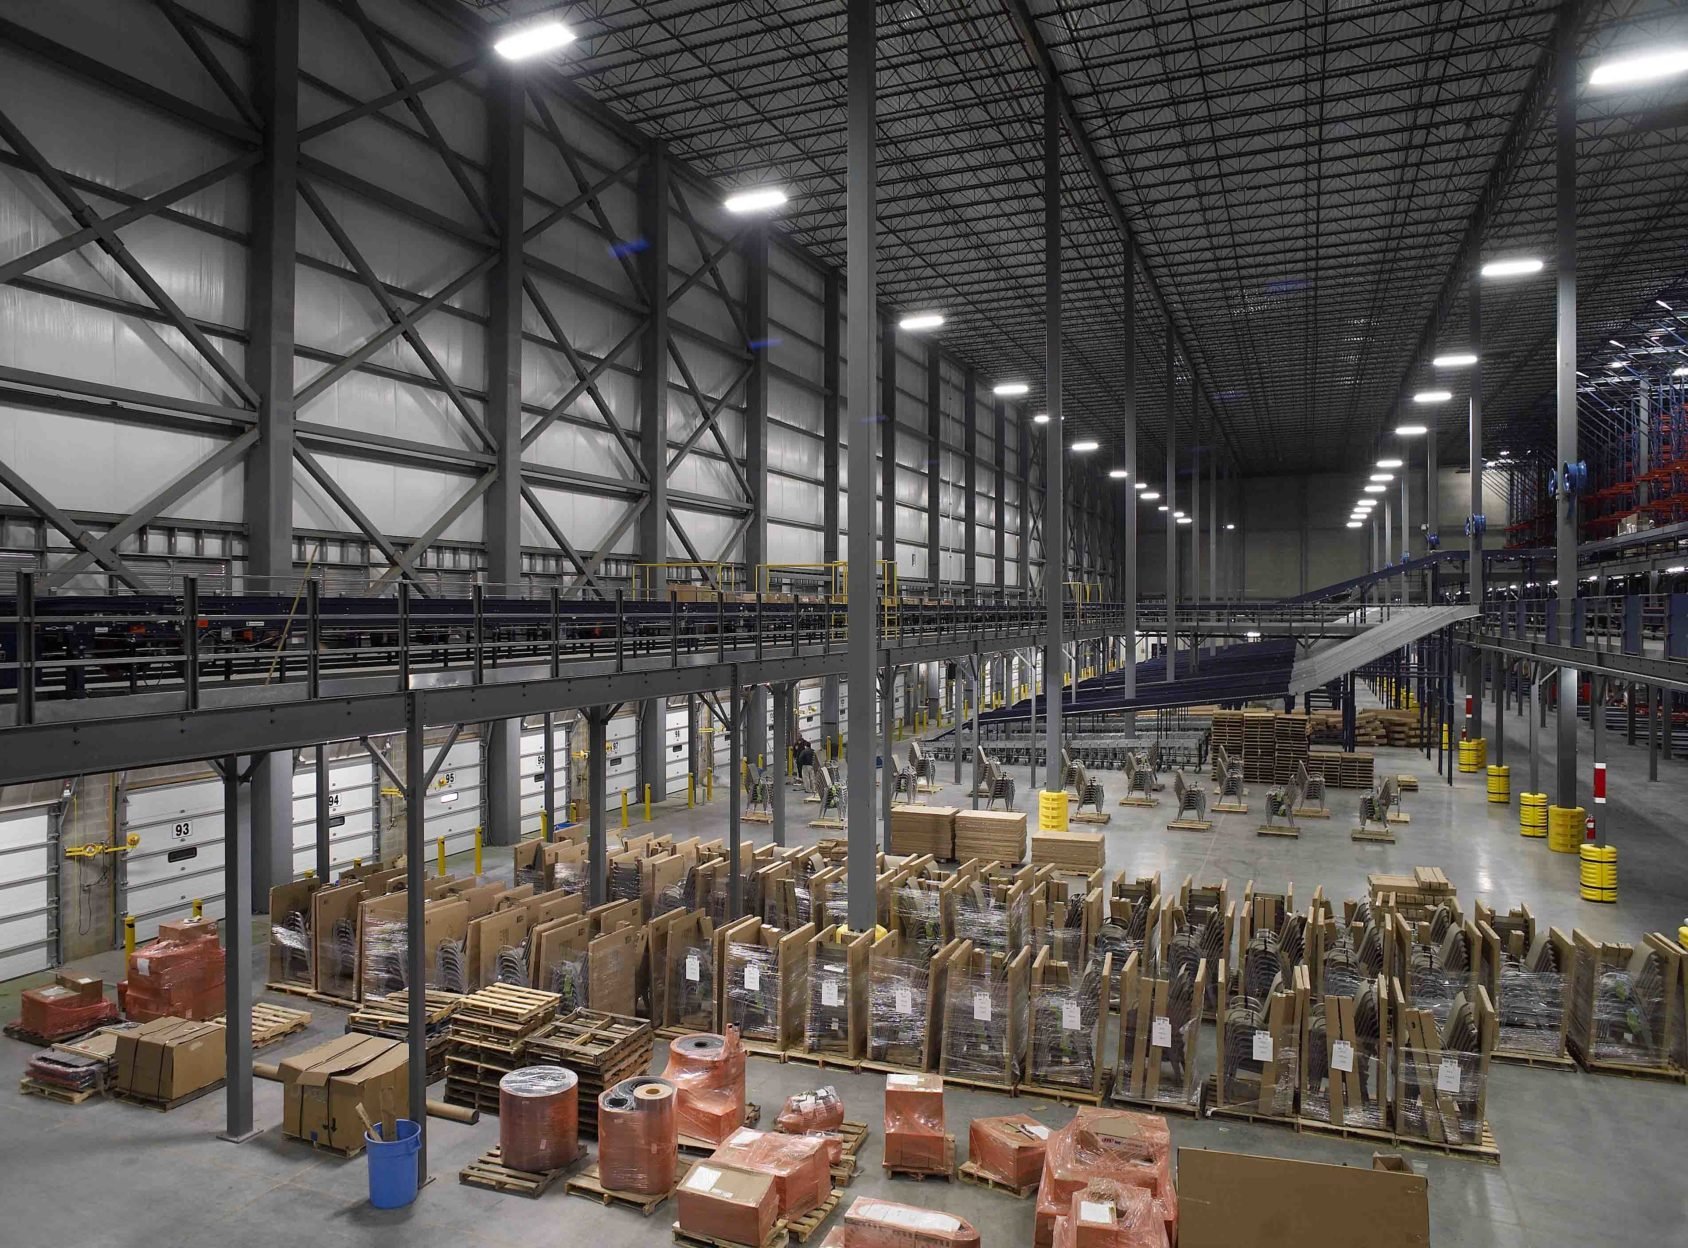 e-commerce fulfillment center design with conveyor belt system and storage